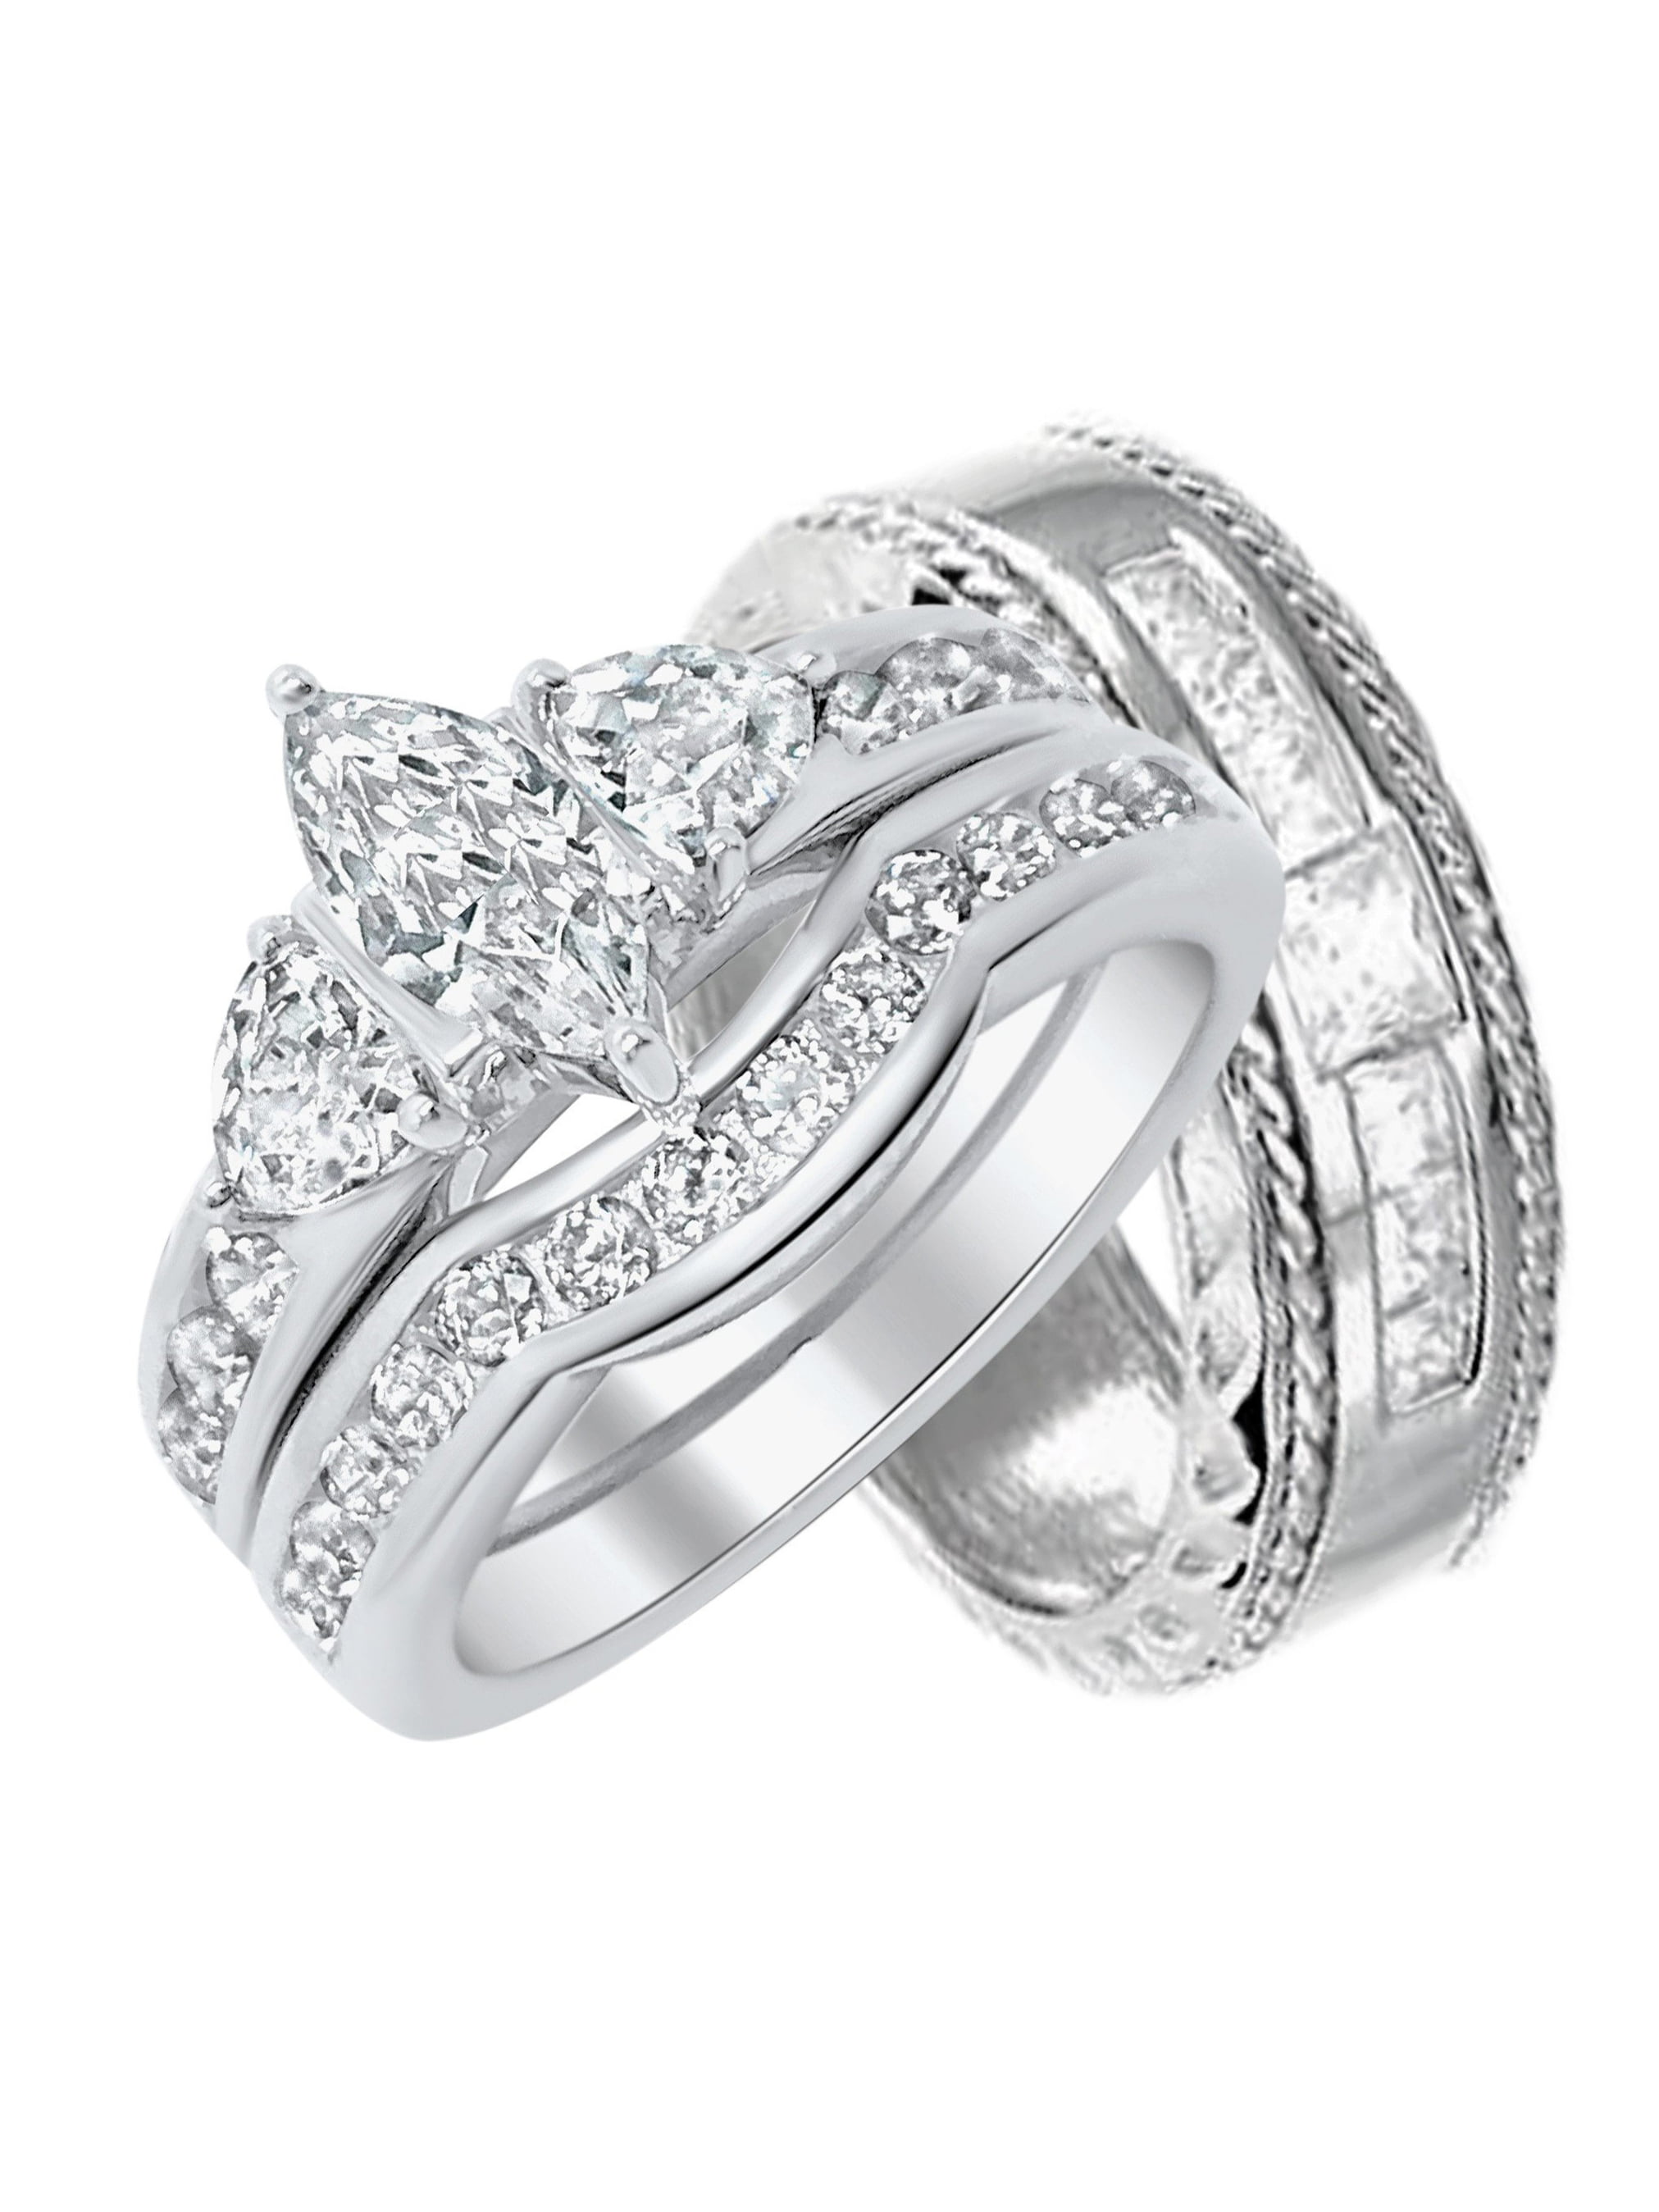 Cheap Matching Wedding  Rings  For Bride  And Groom  Wedding  